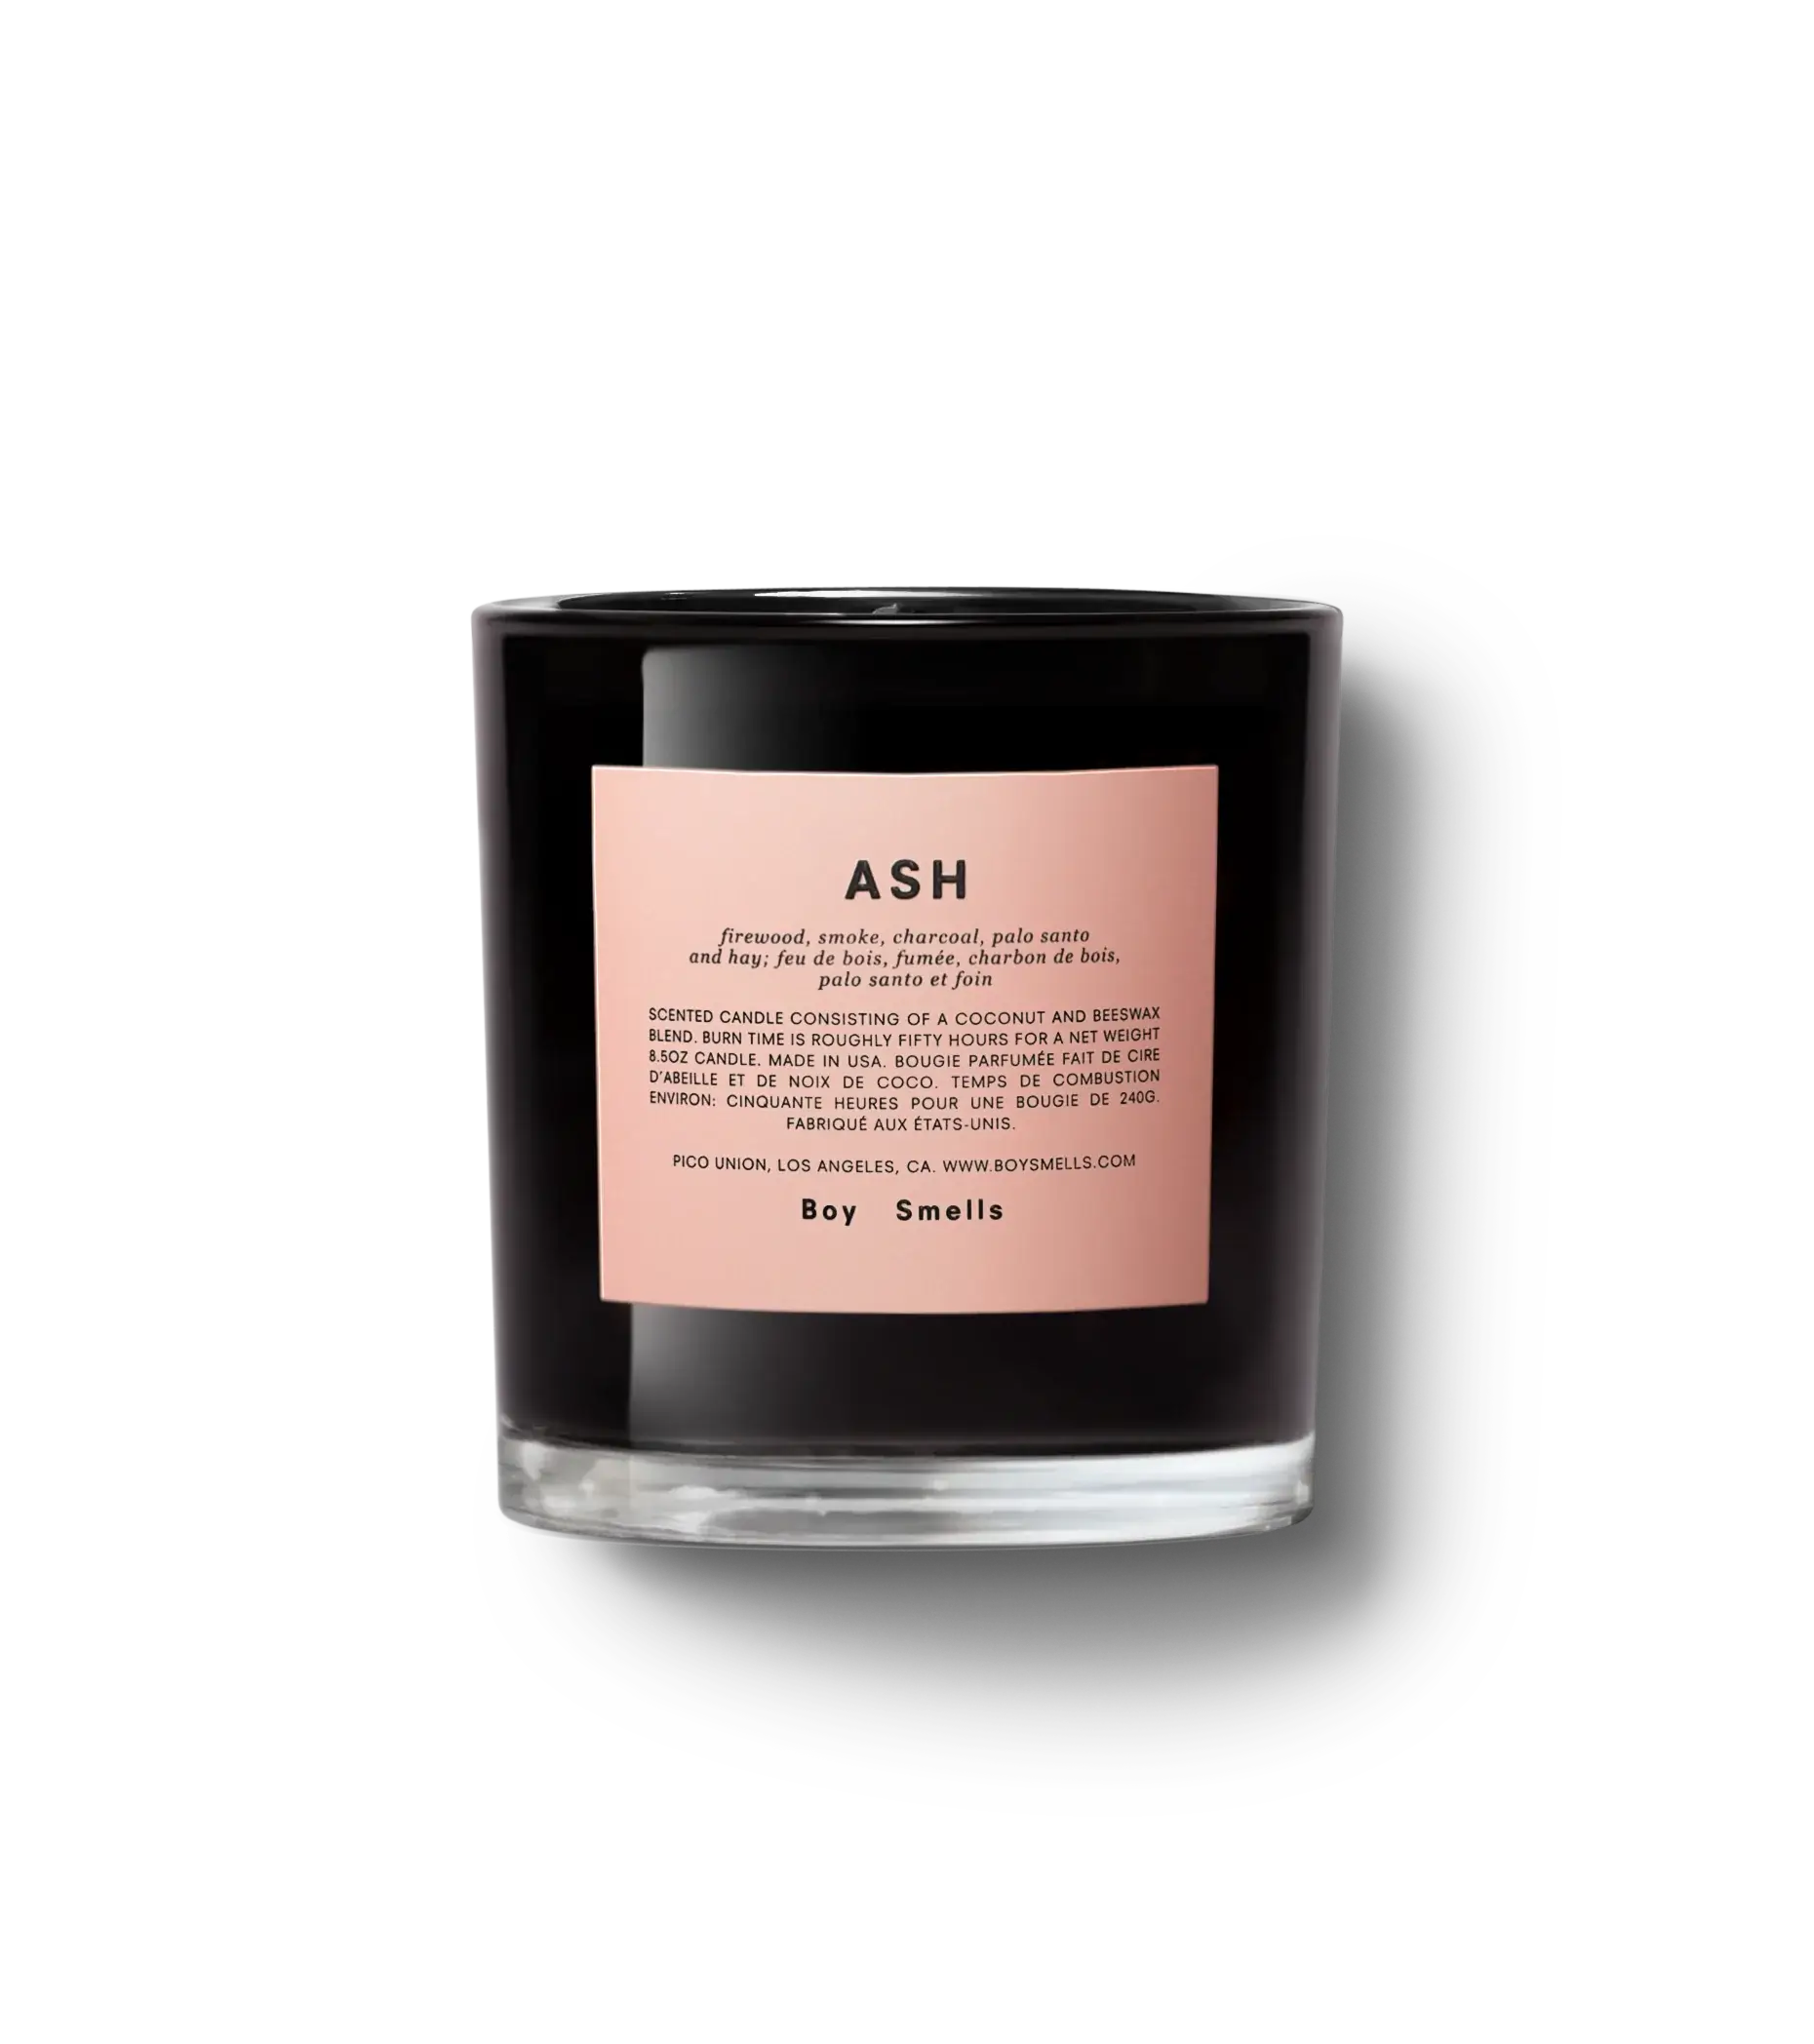 Boy Smells Ash Luxury Scented Candle